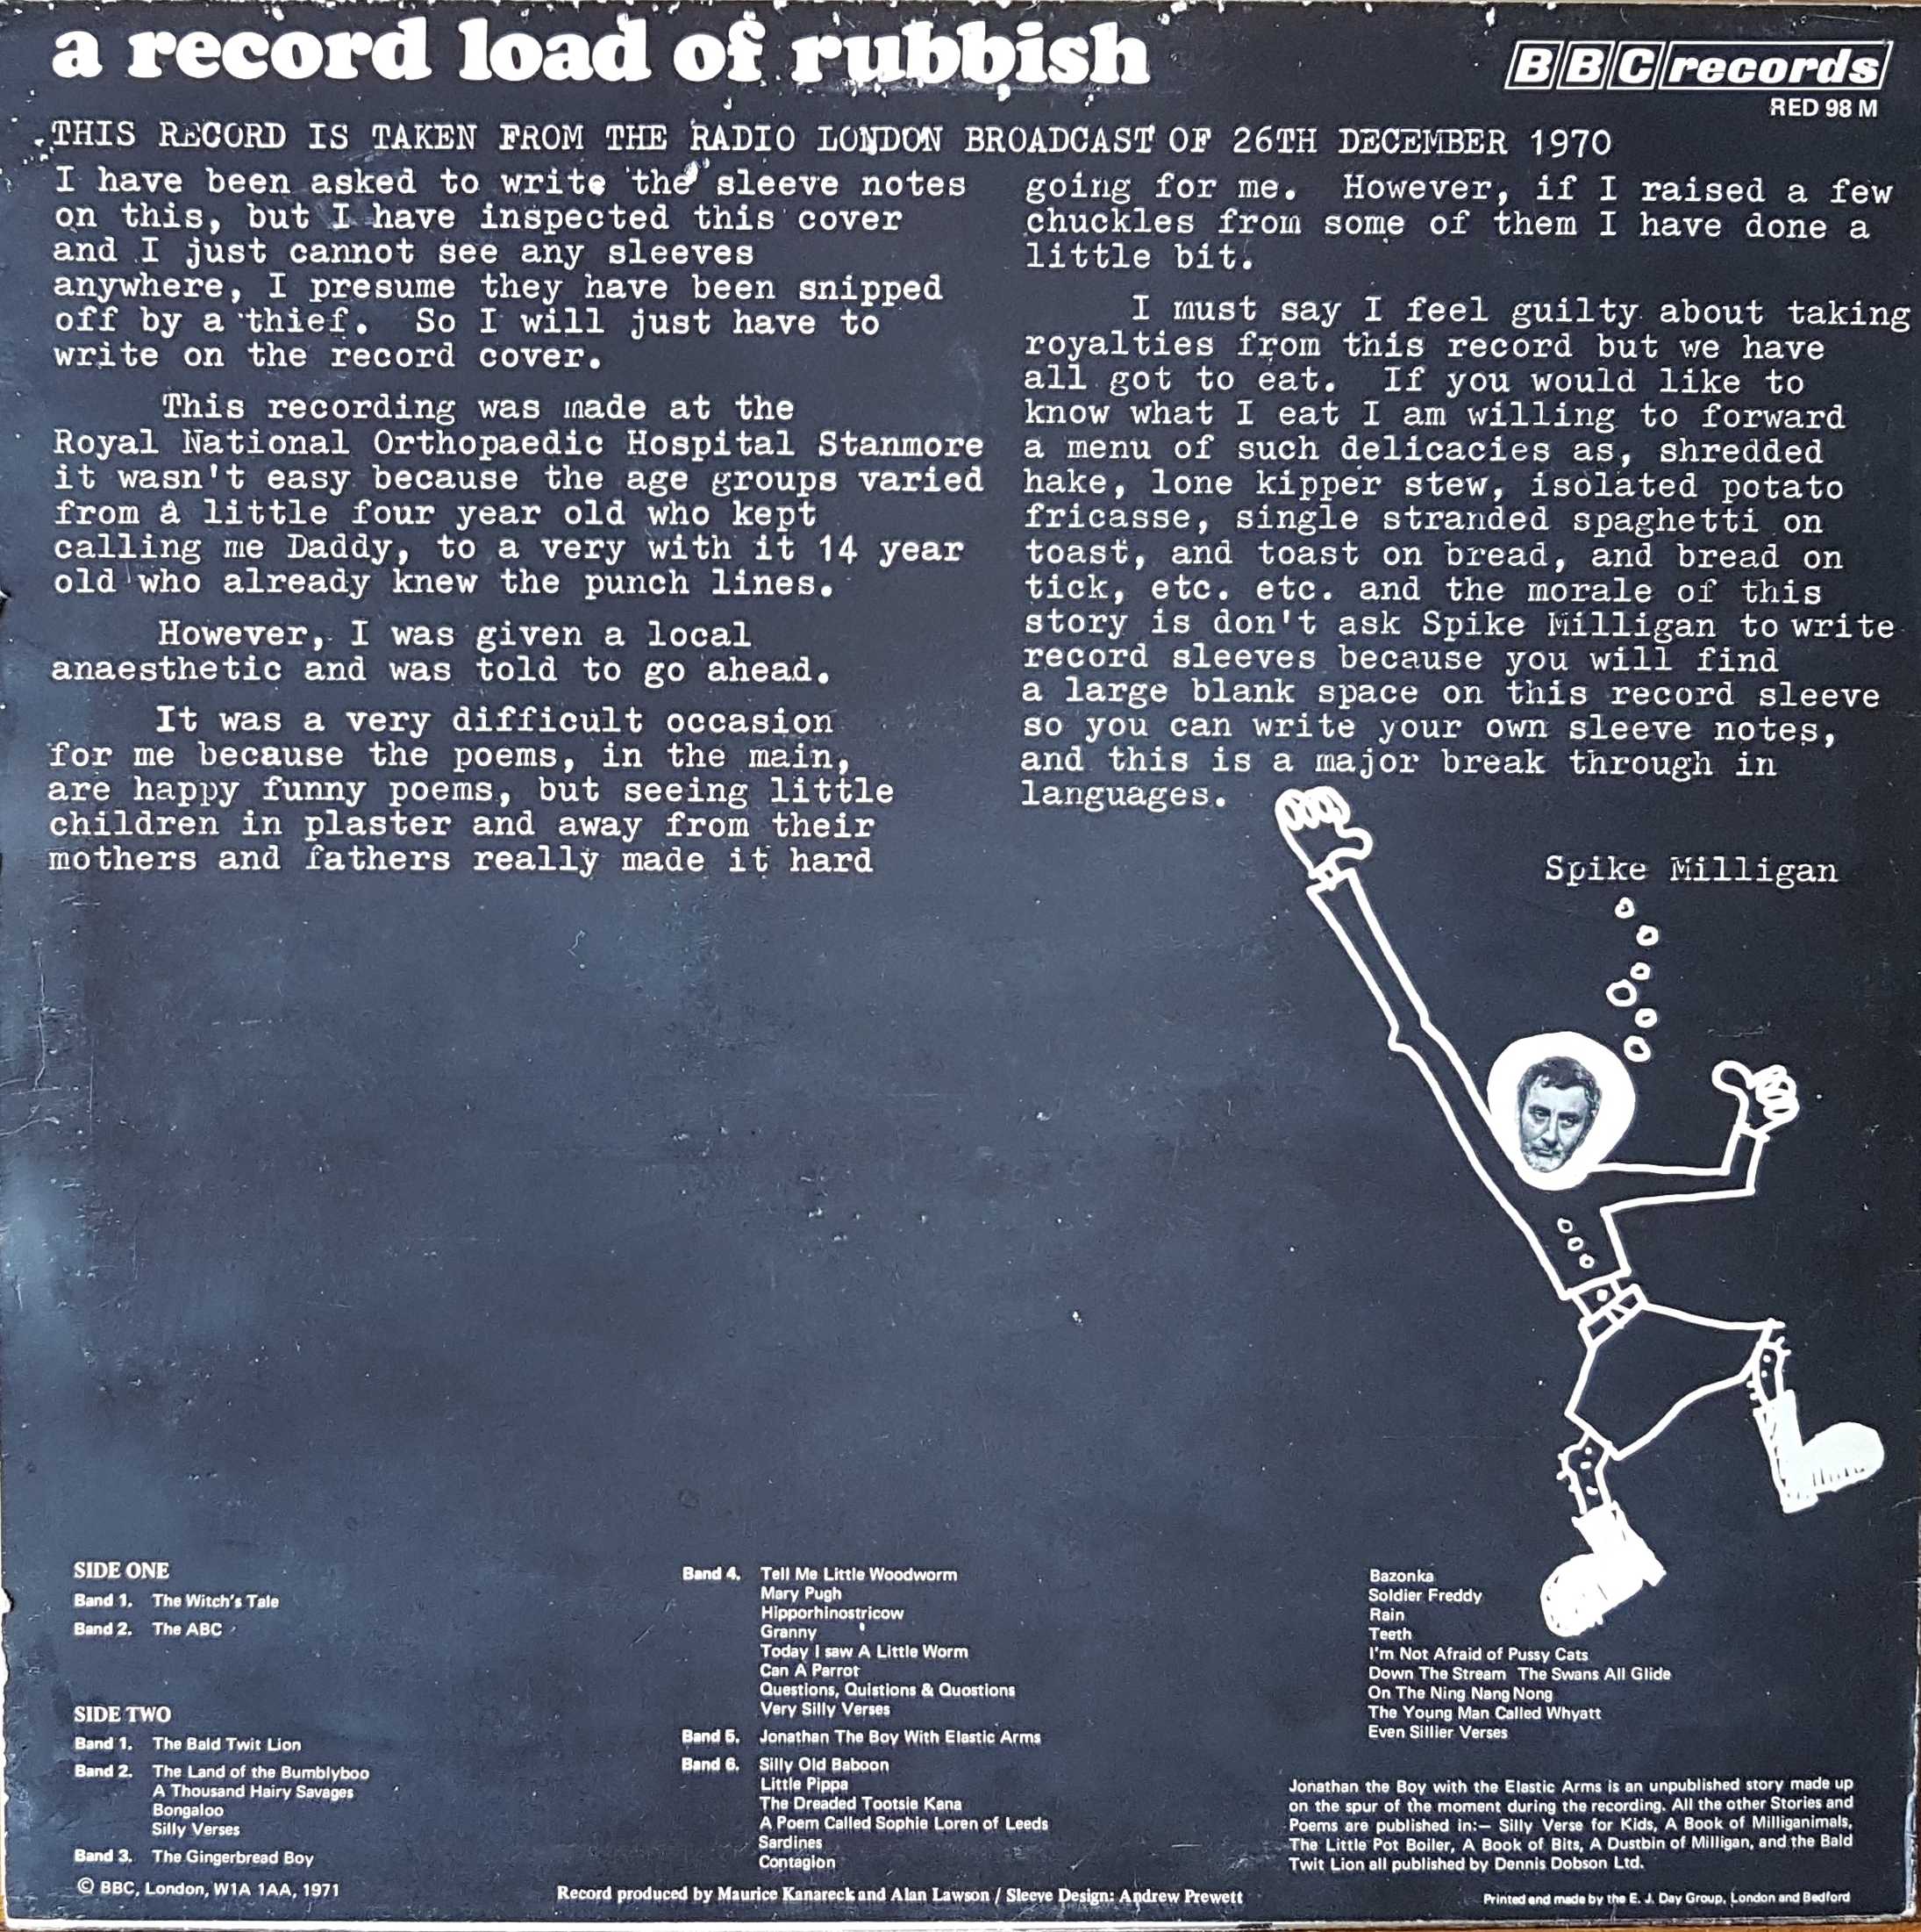 Picture of RED 98 Spike Milligan, a record load of rubbish by artist Spike Milligan from the BBC records and Tapes library